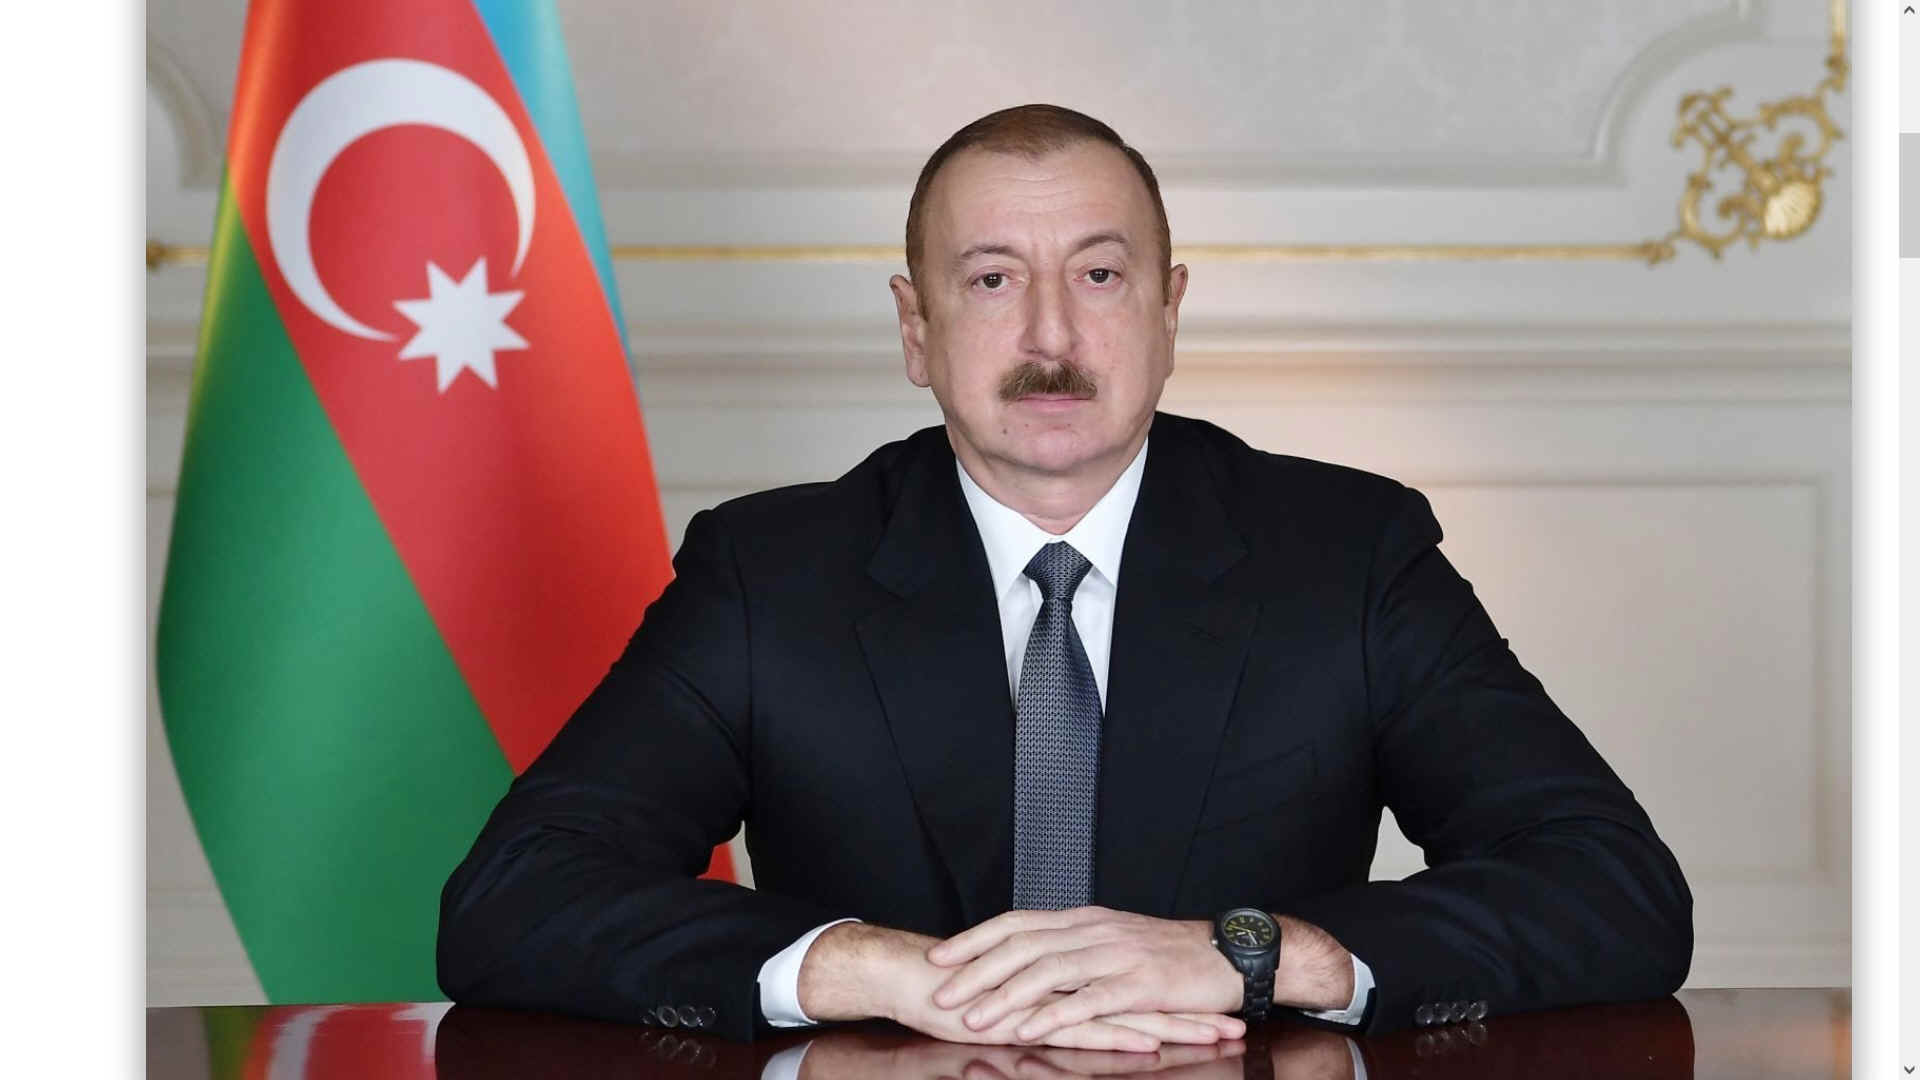 President of the Republic of Azerbaijan Ilham Aliyev signed a decree on the establishment of the Organizational Committee in connection with the 29th session of the Conference of the Parties to the United Nations Framework Convention on Climate Change (COP29), the 19th session of the Meeting of the Parties to the Kyoto Protocol, and the 6th session of the Meeting of the Parties to the Paris Agreement, Azernews reports.